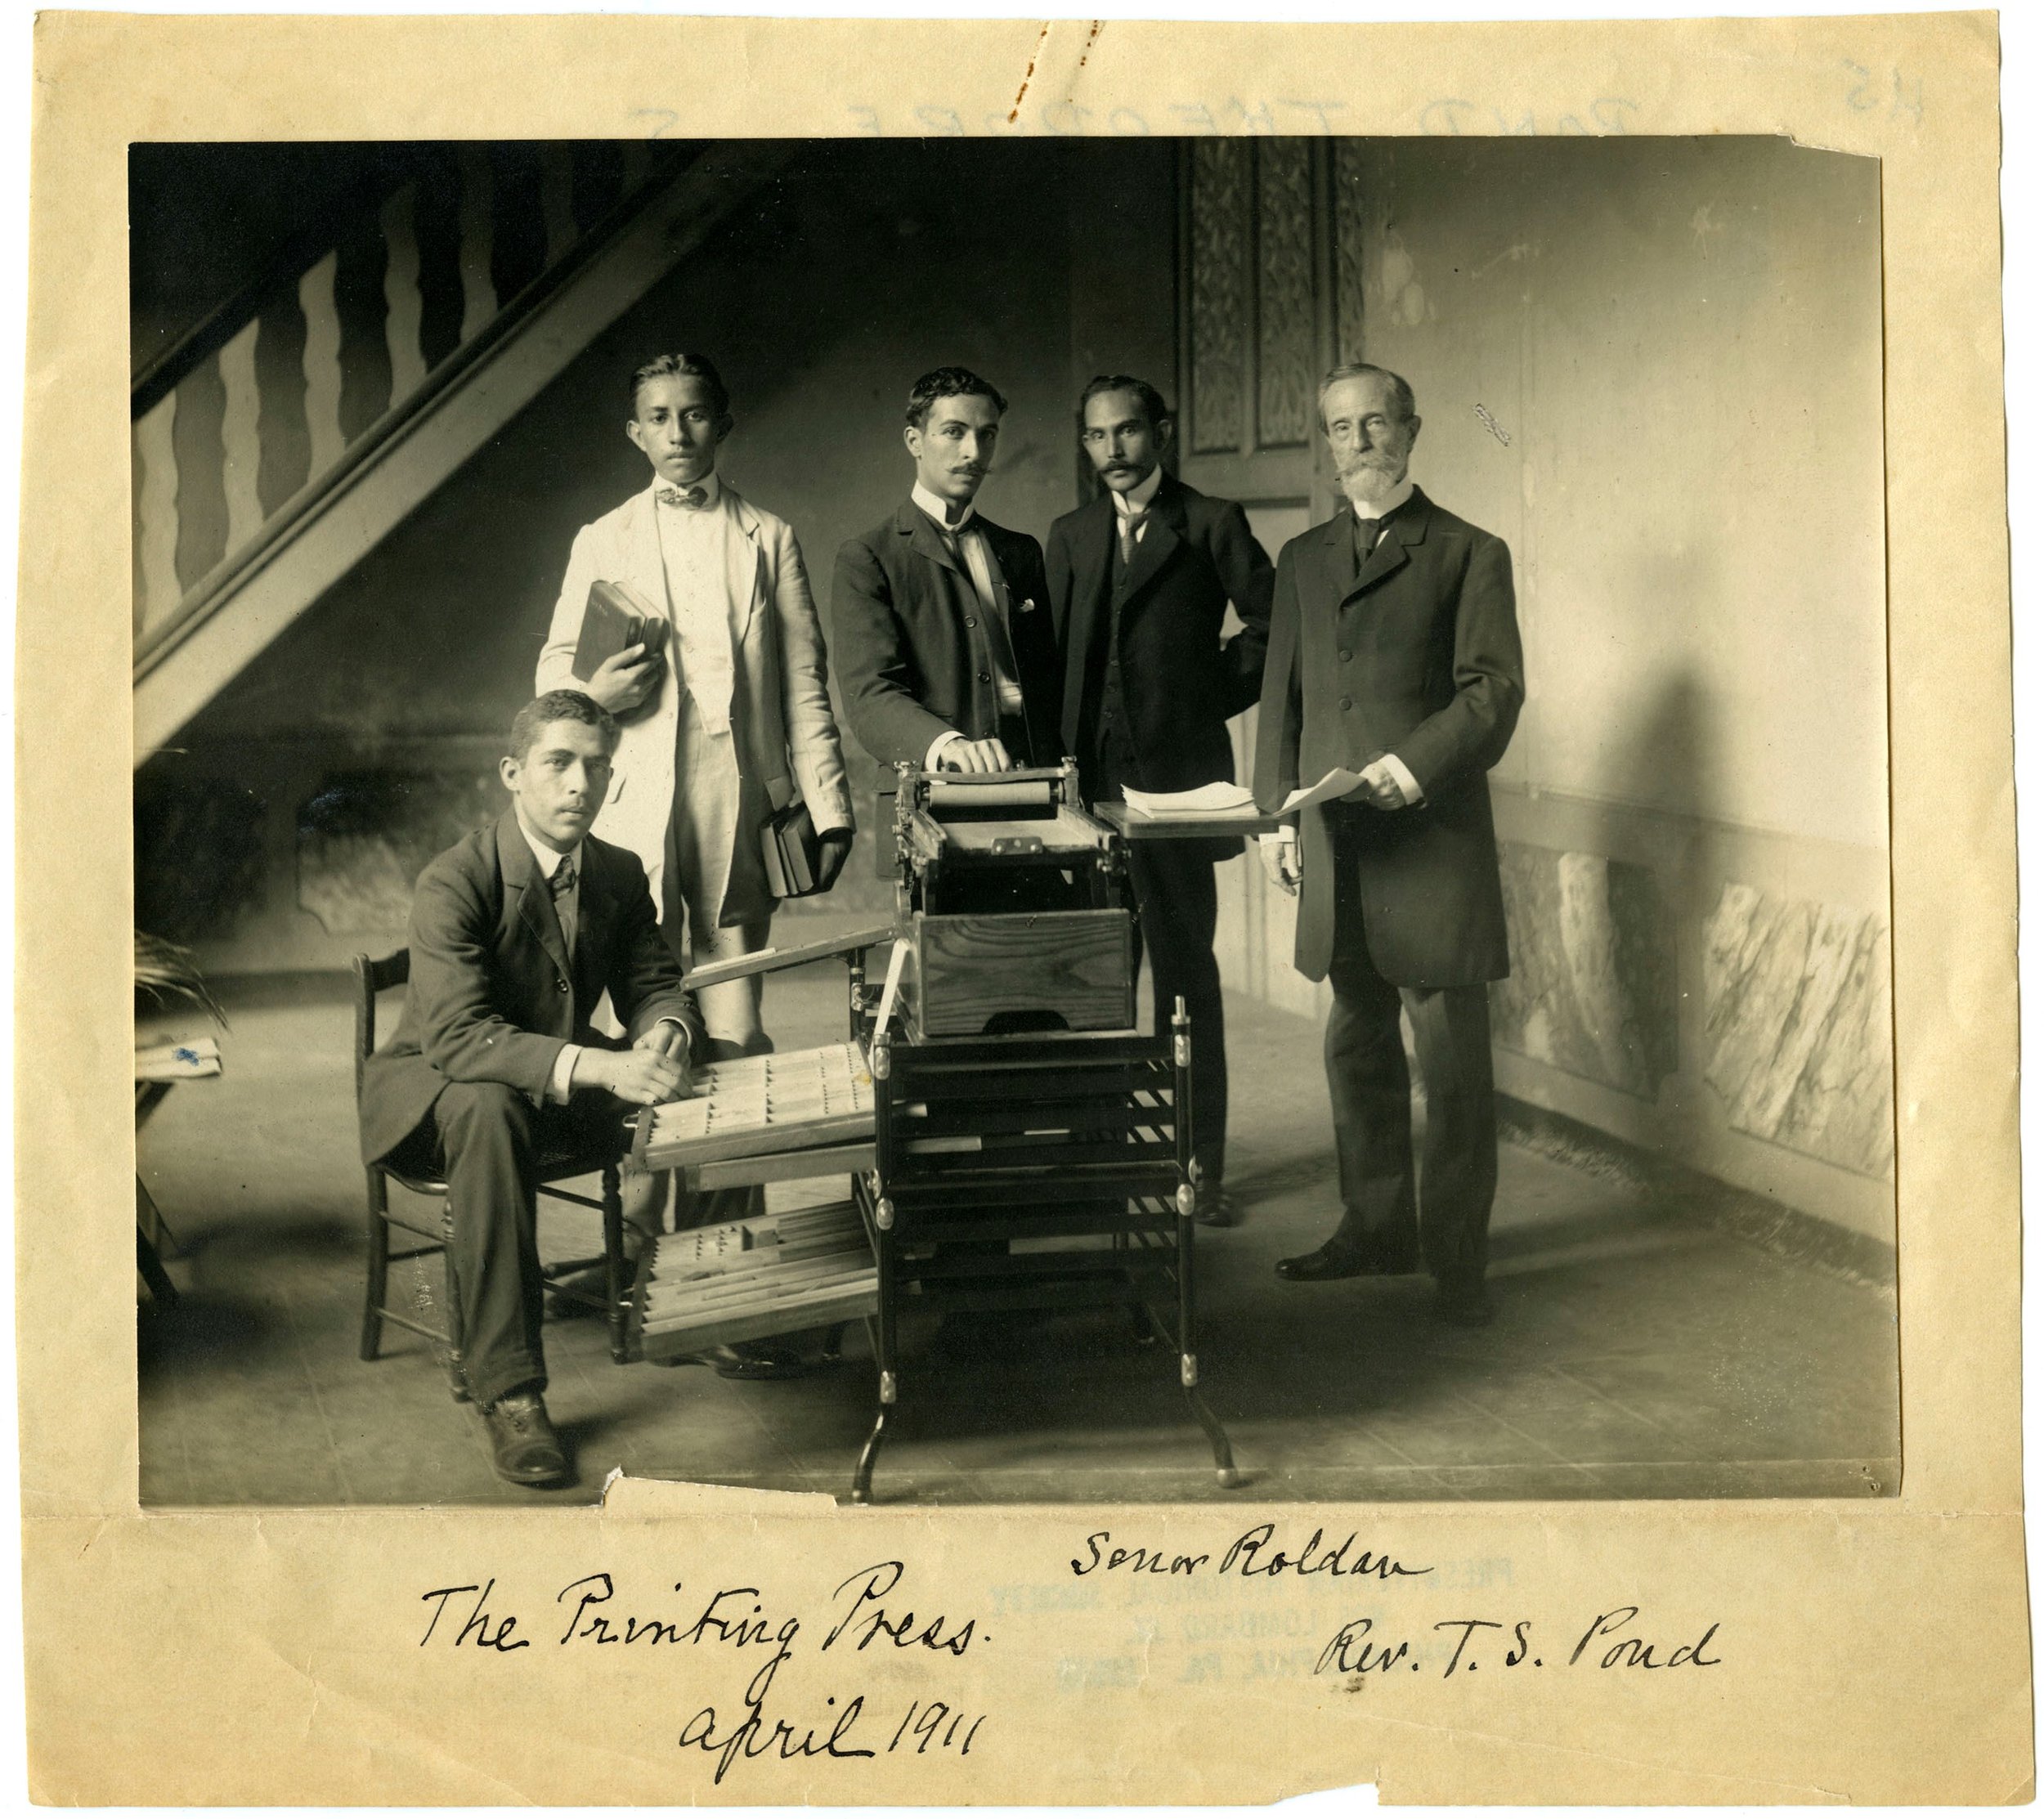 Rev. Pond (far right) with local church leaders and printing press, 1911